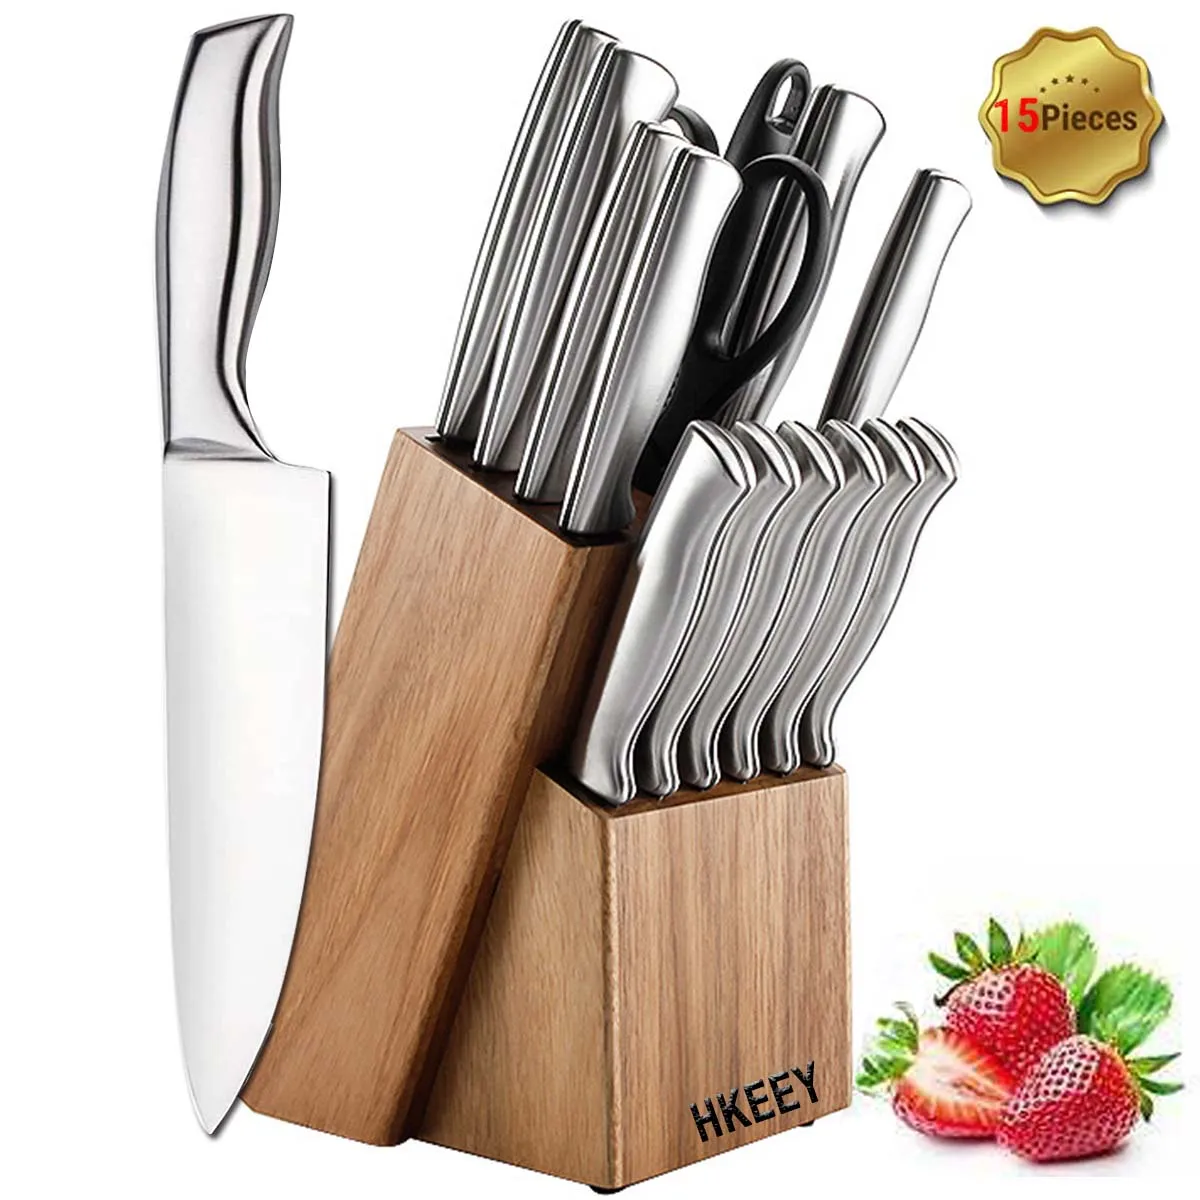 

Knife Set, 15 Pieces German Stainless Steel Kitchen Knives Block Set with Built-in Sharpener, Silver